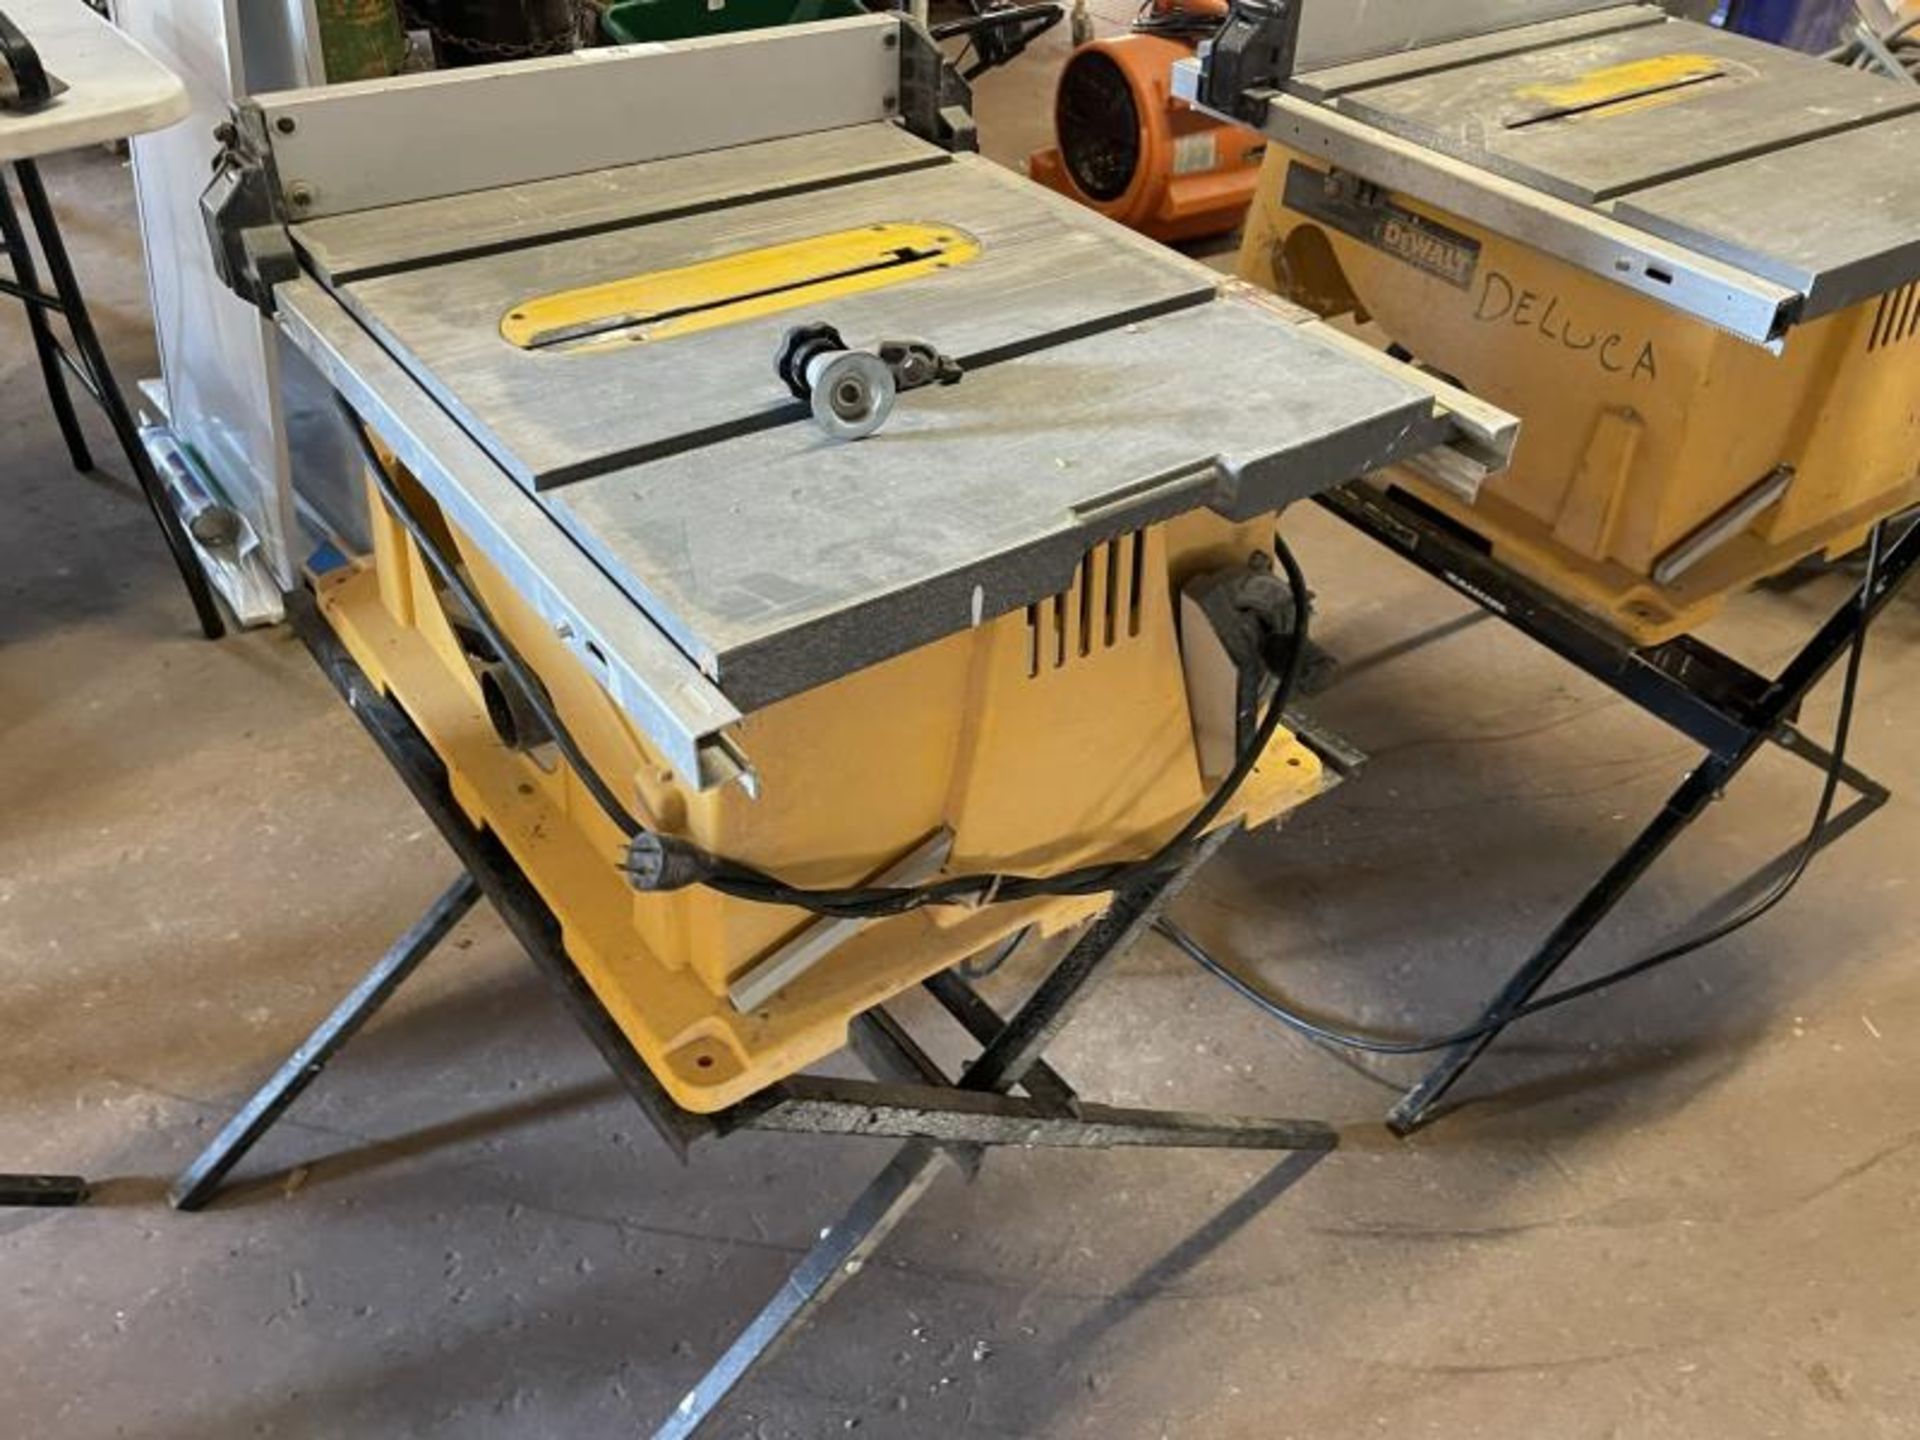 DeWalt collapsible Table Saw M: DW744 - Image 6 of 6